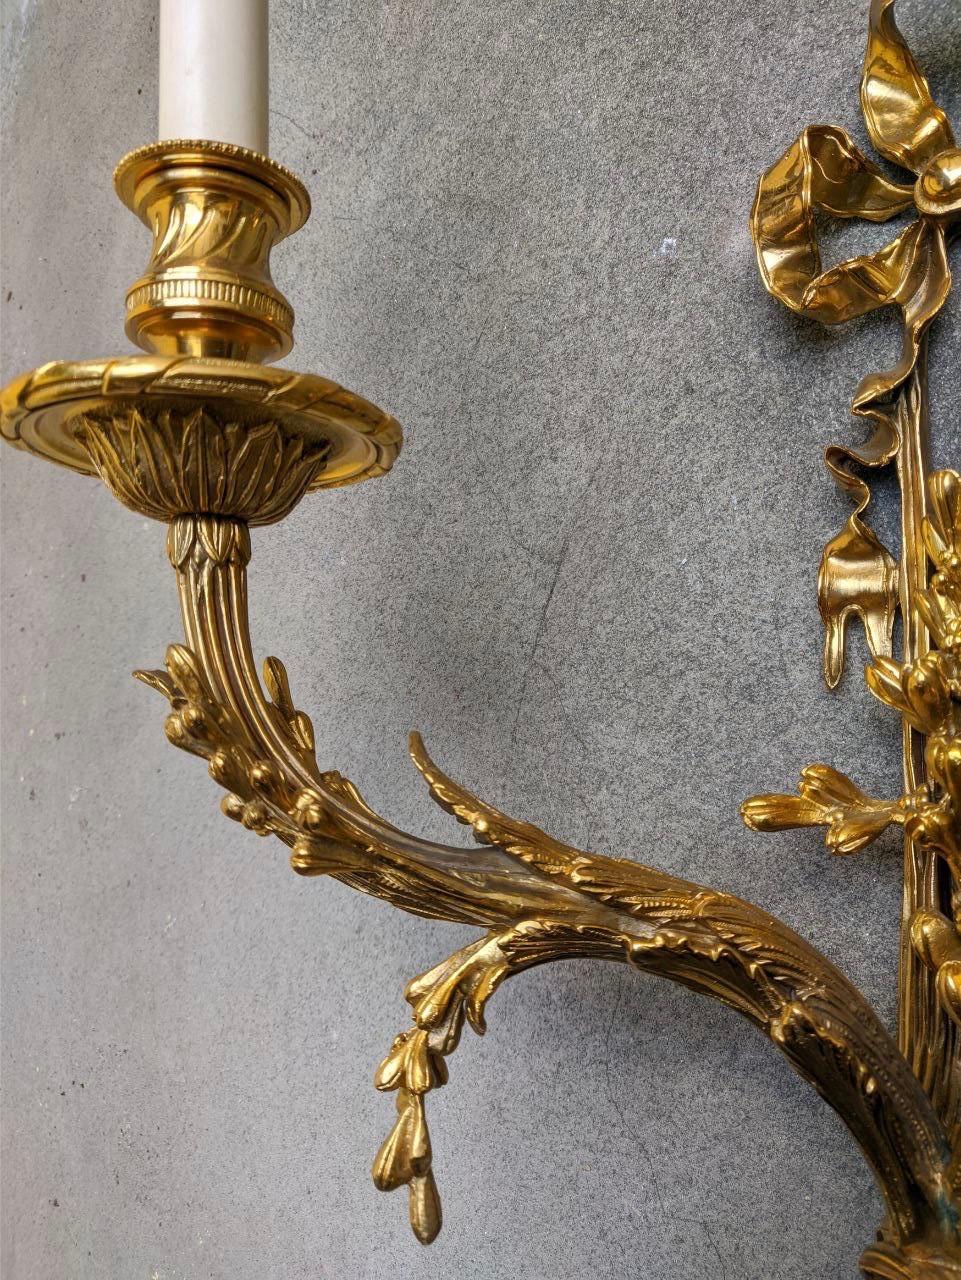 This French Directoire style sconce features top-quality chiselled bronze, with many vivid details typical of the end of the 18th century. At the top, there is a staple, a typical element of the Louis XVI period. Below this, there is a bunch of